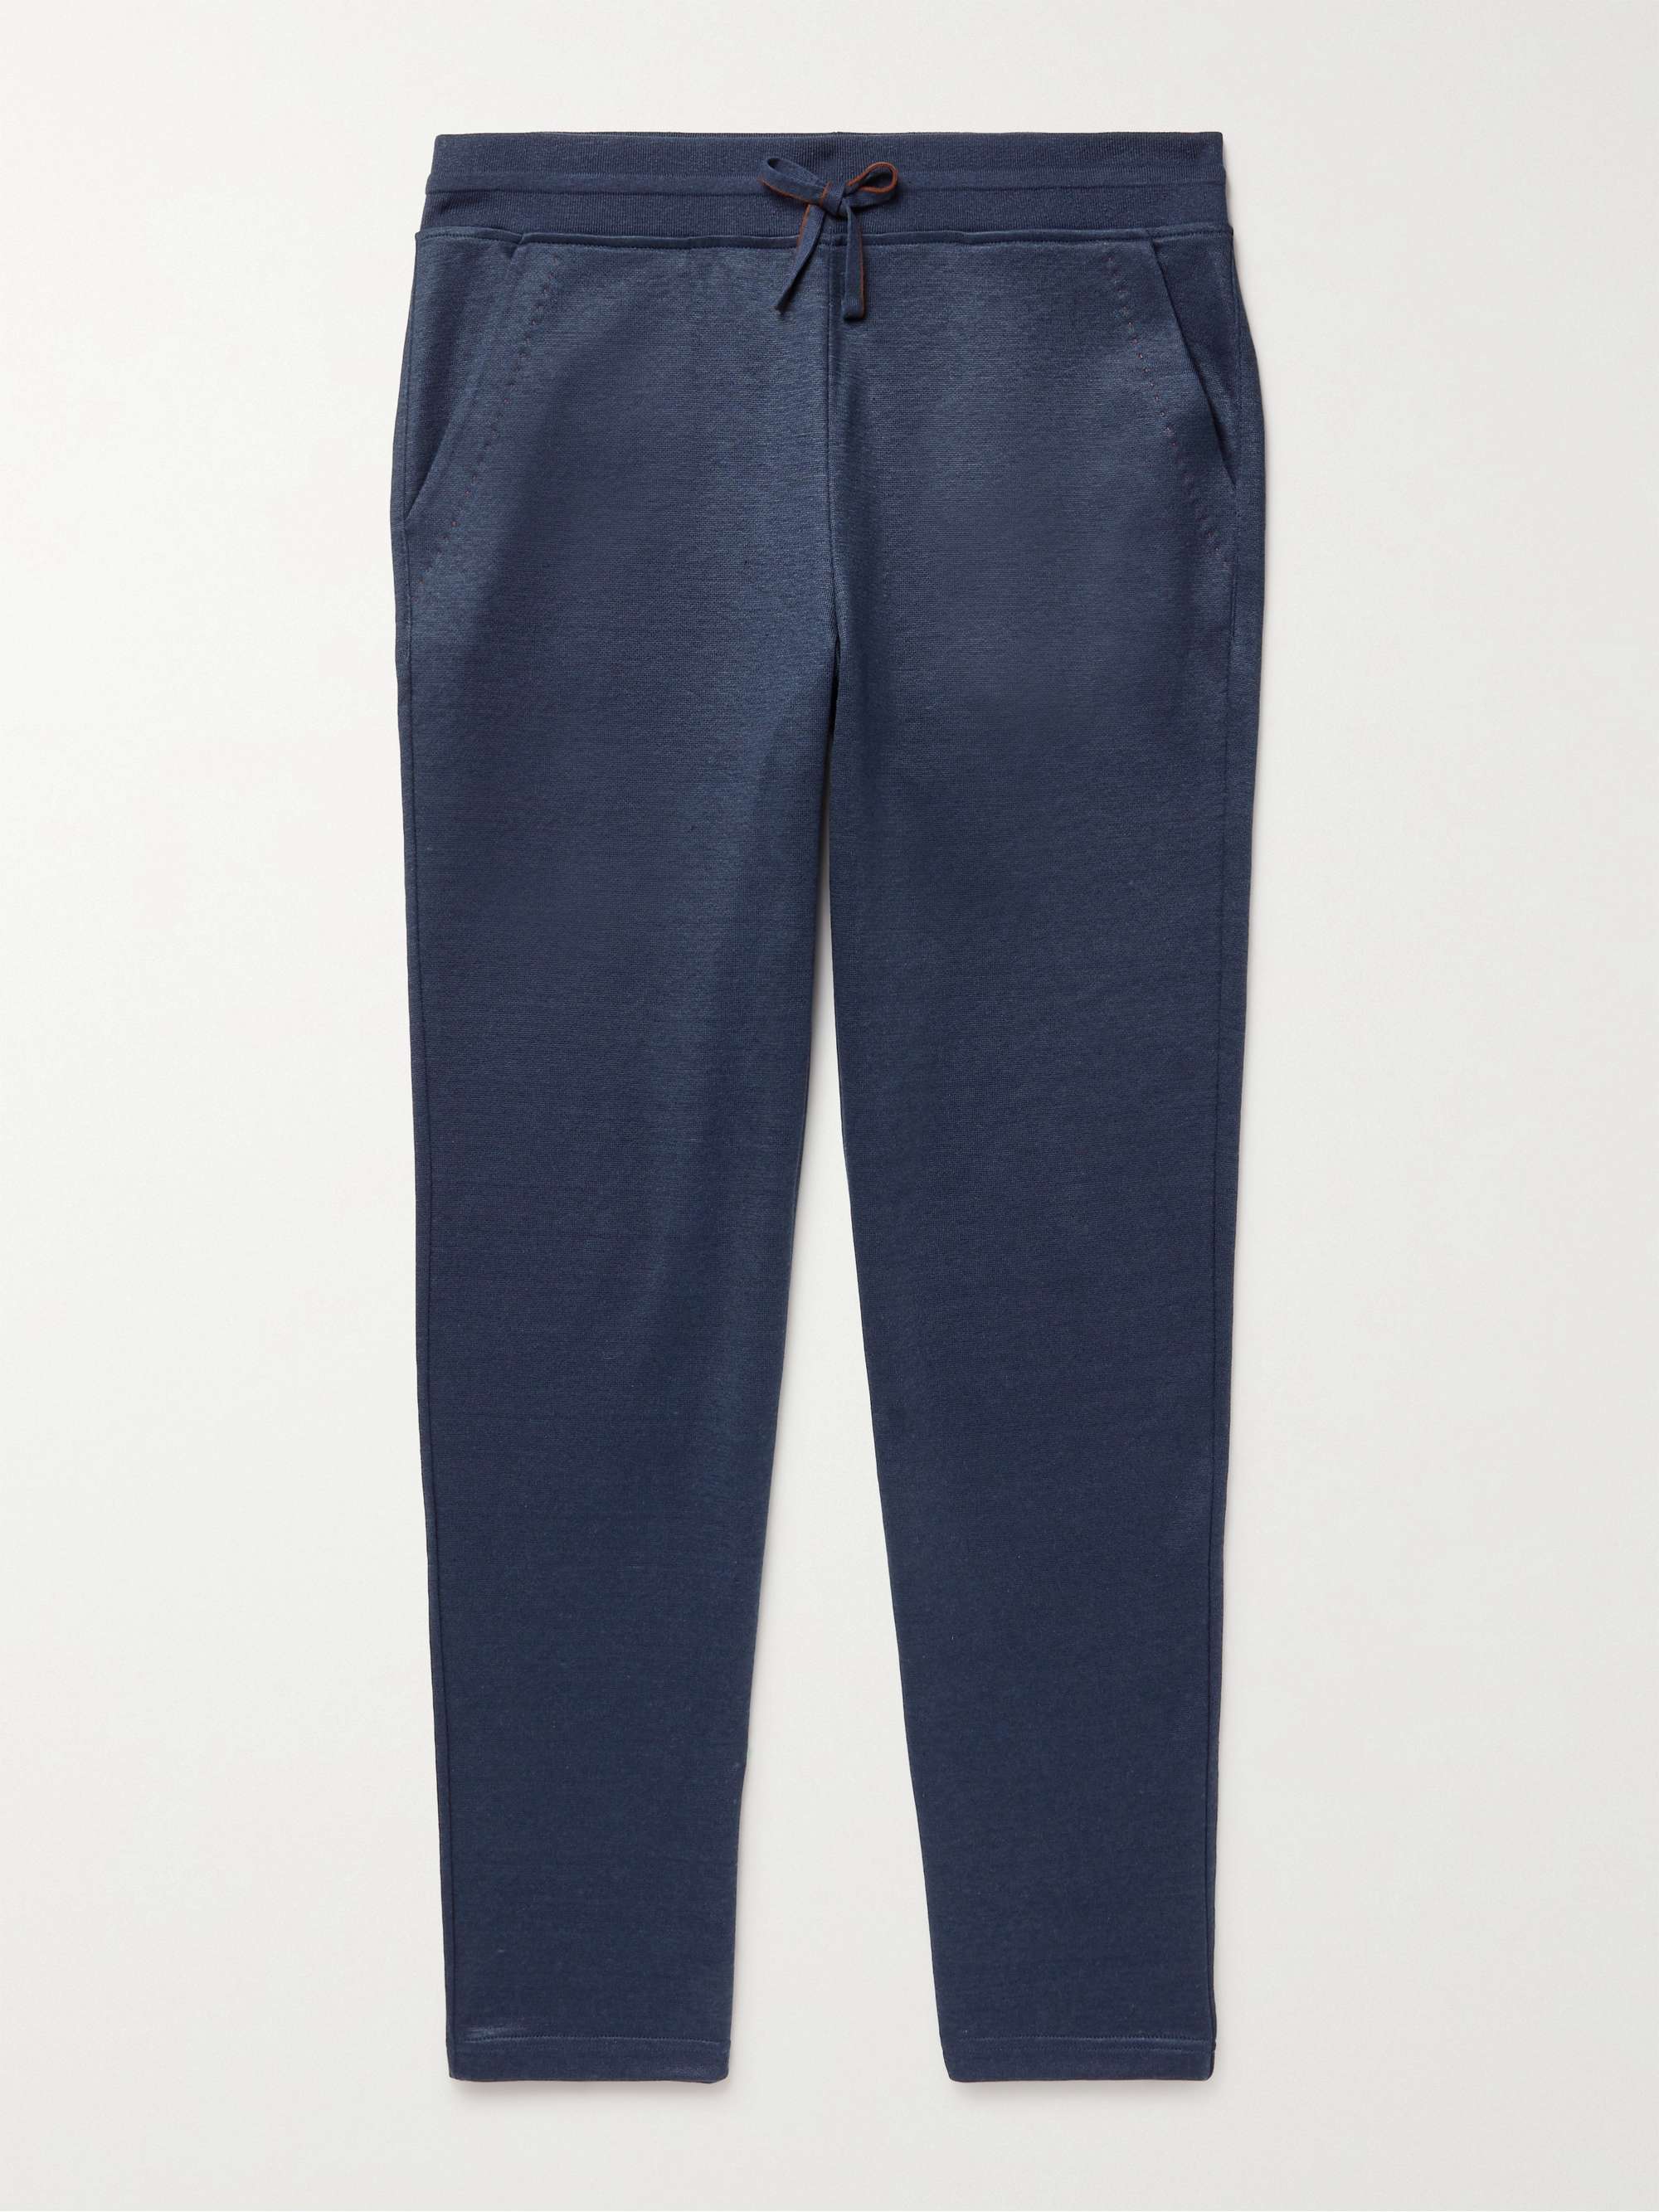 LORO PIANA Tapered Cashmere-Blend Sweatpants for Men